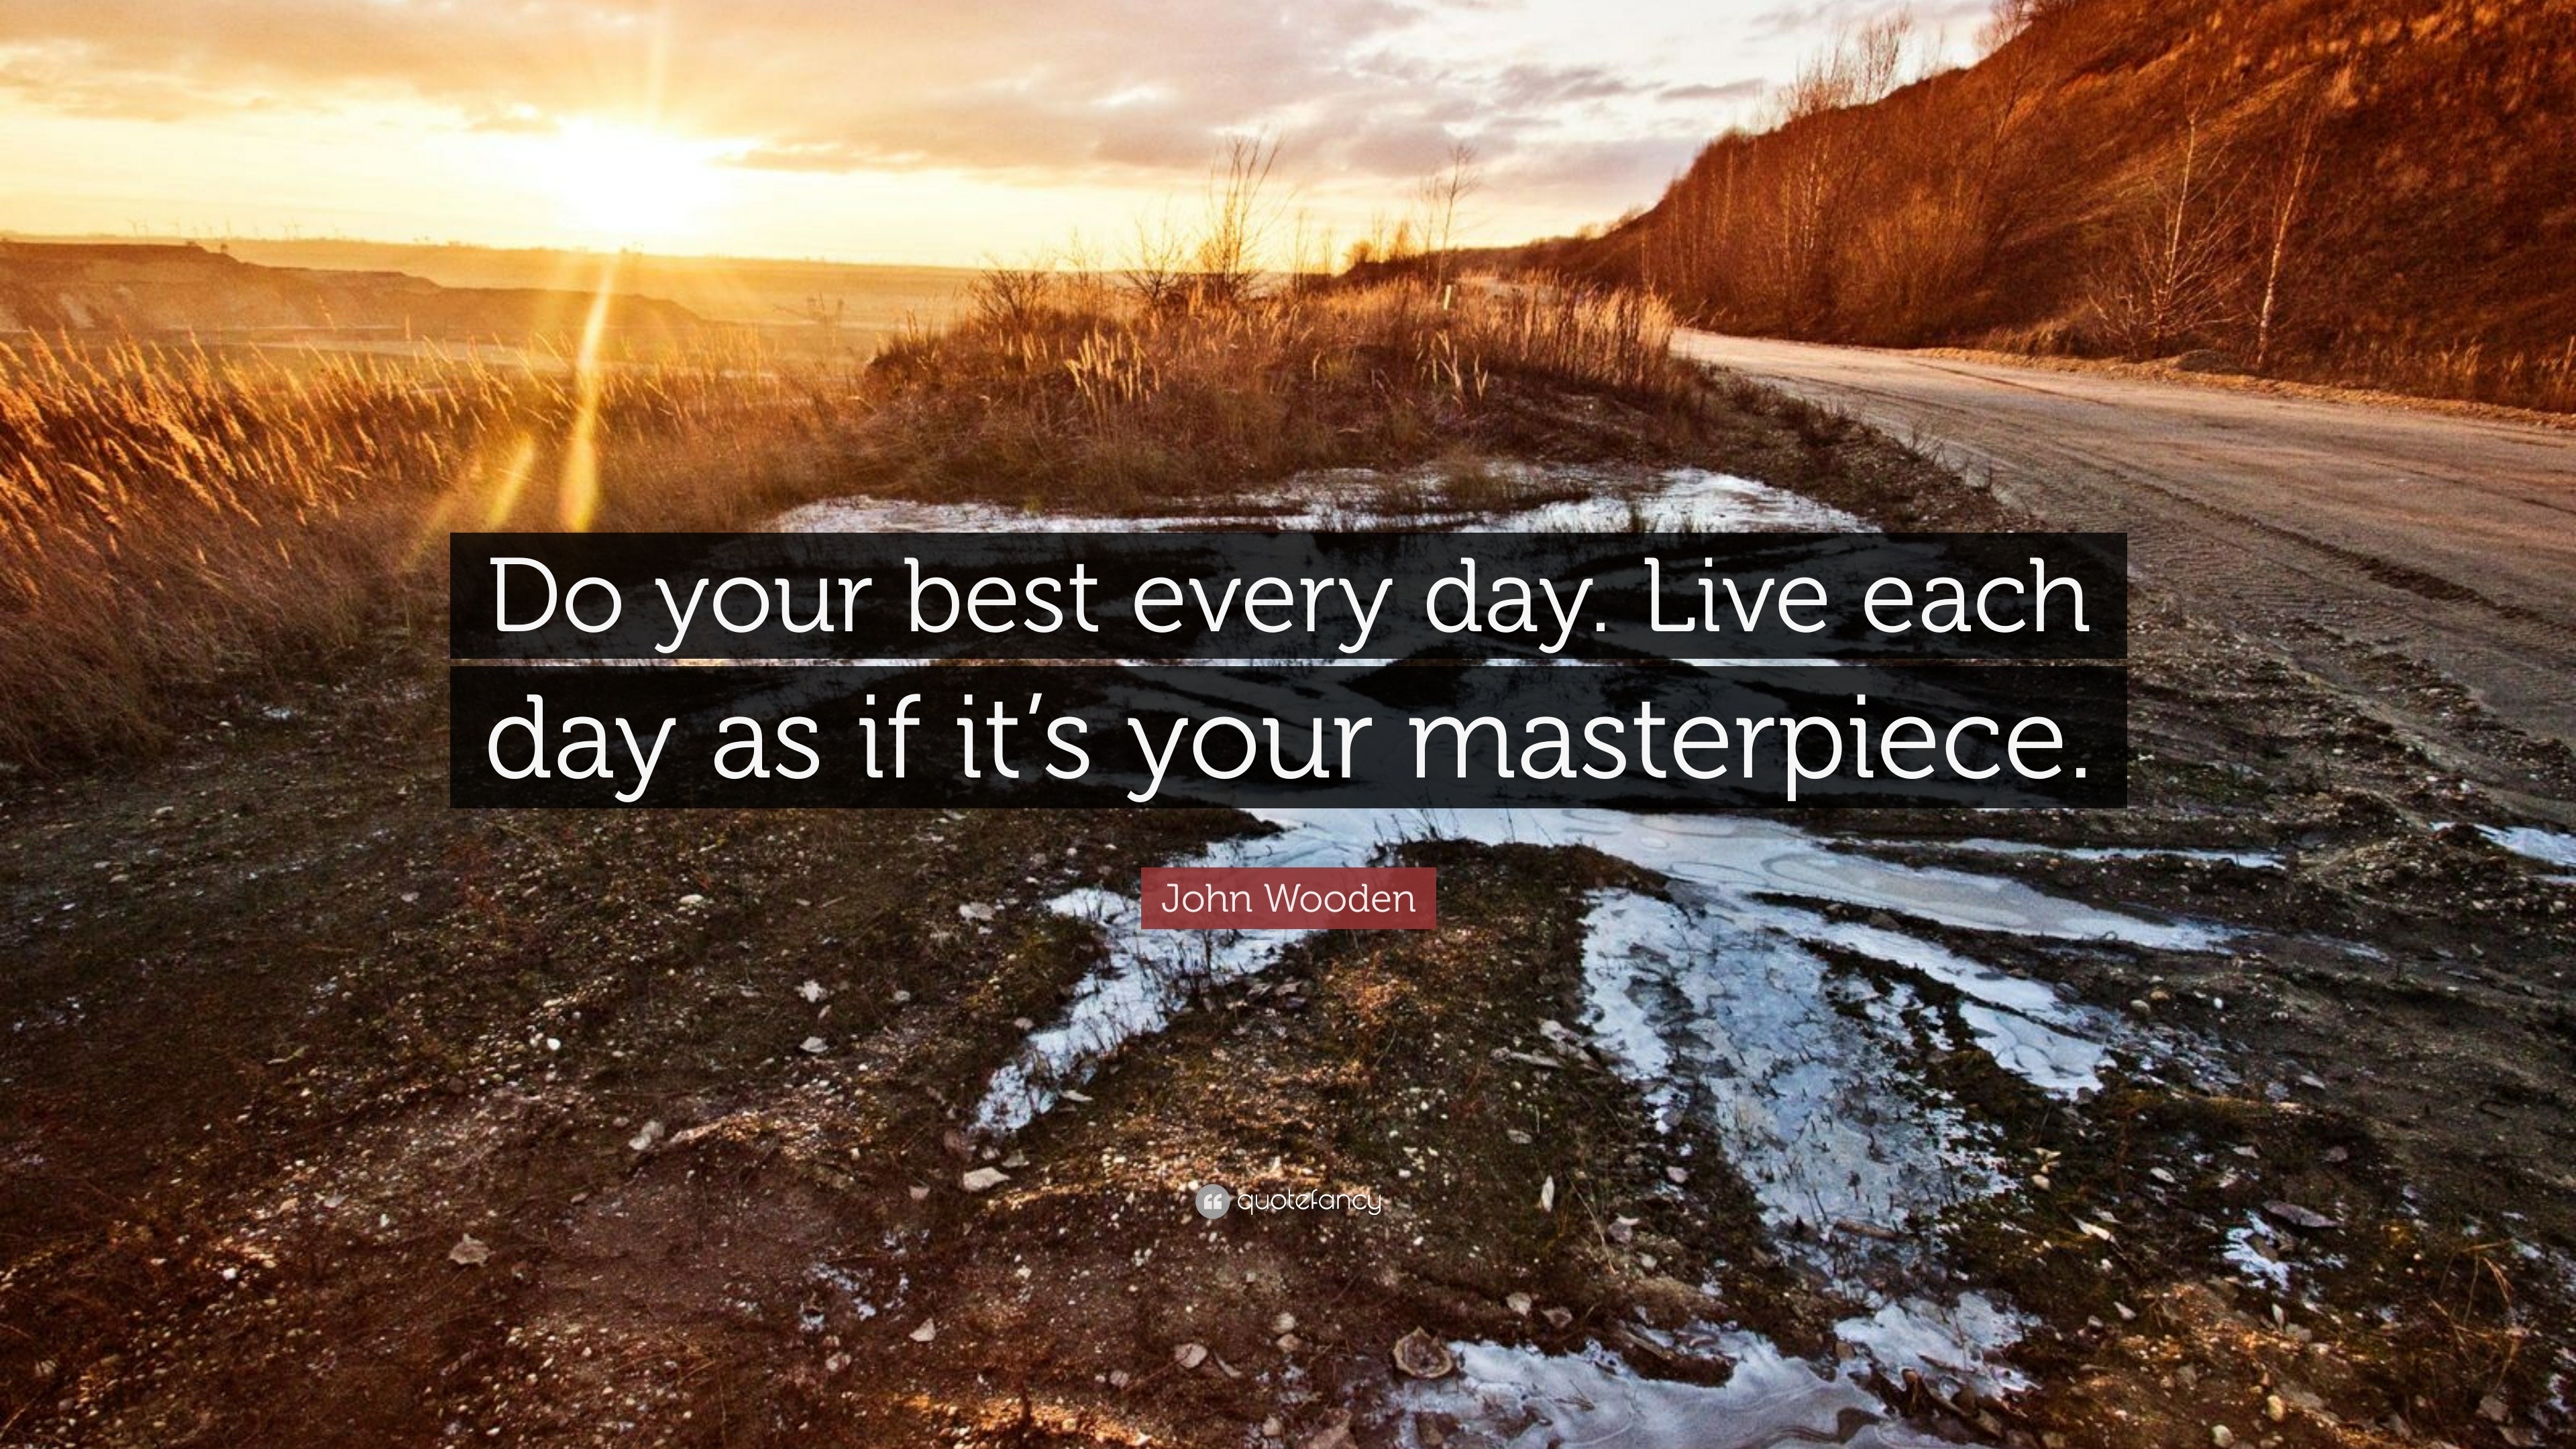 John Wooden Quote: “Do your best every day. Live each day as if it's your  masterpiece.”